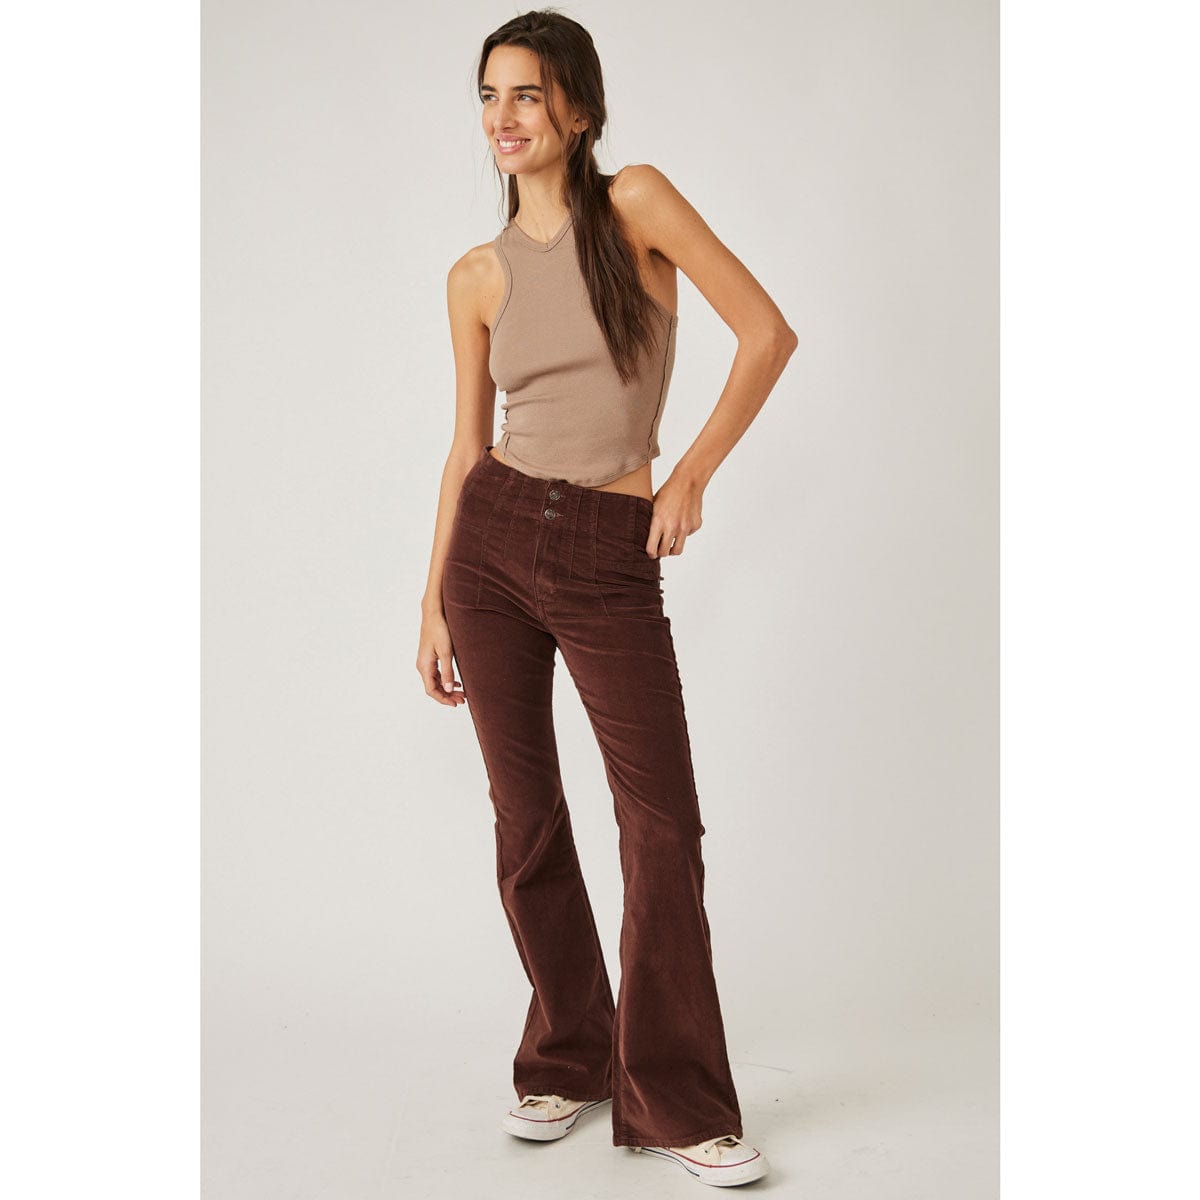 We The Free Jayde Cord Flare Jeans  Flared pants outfit, Bottom clothes,  Flare jeans